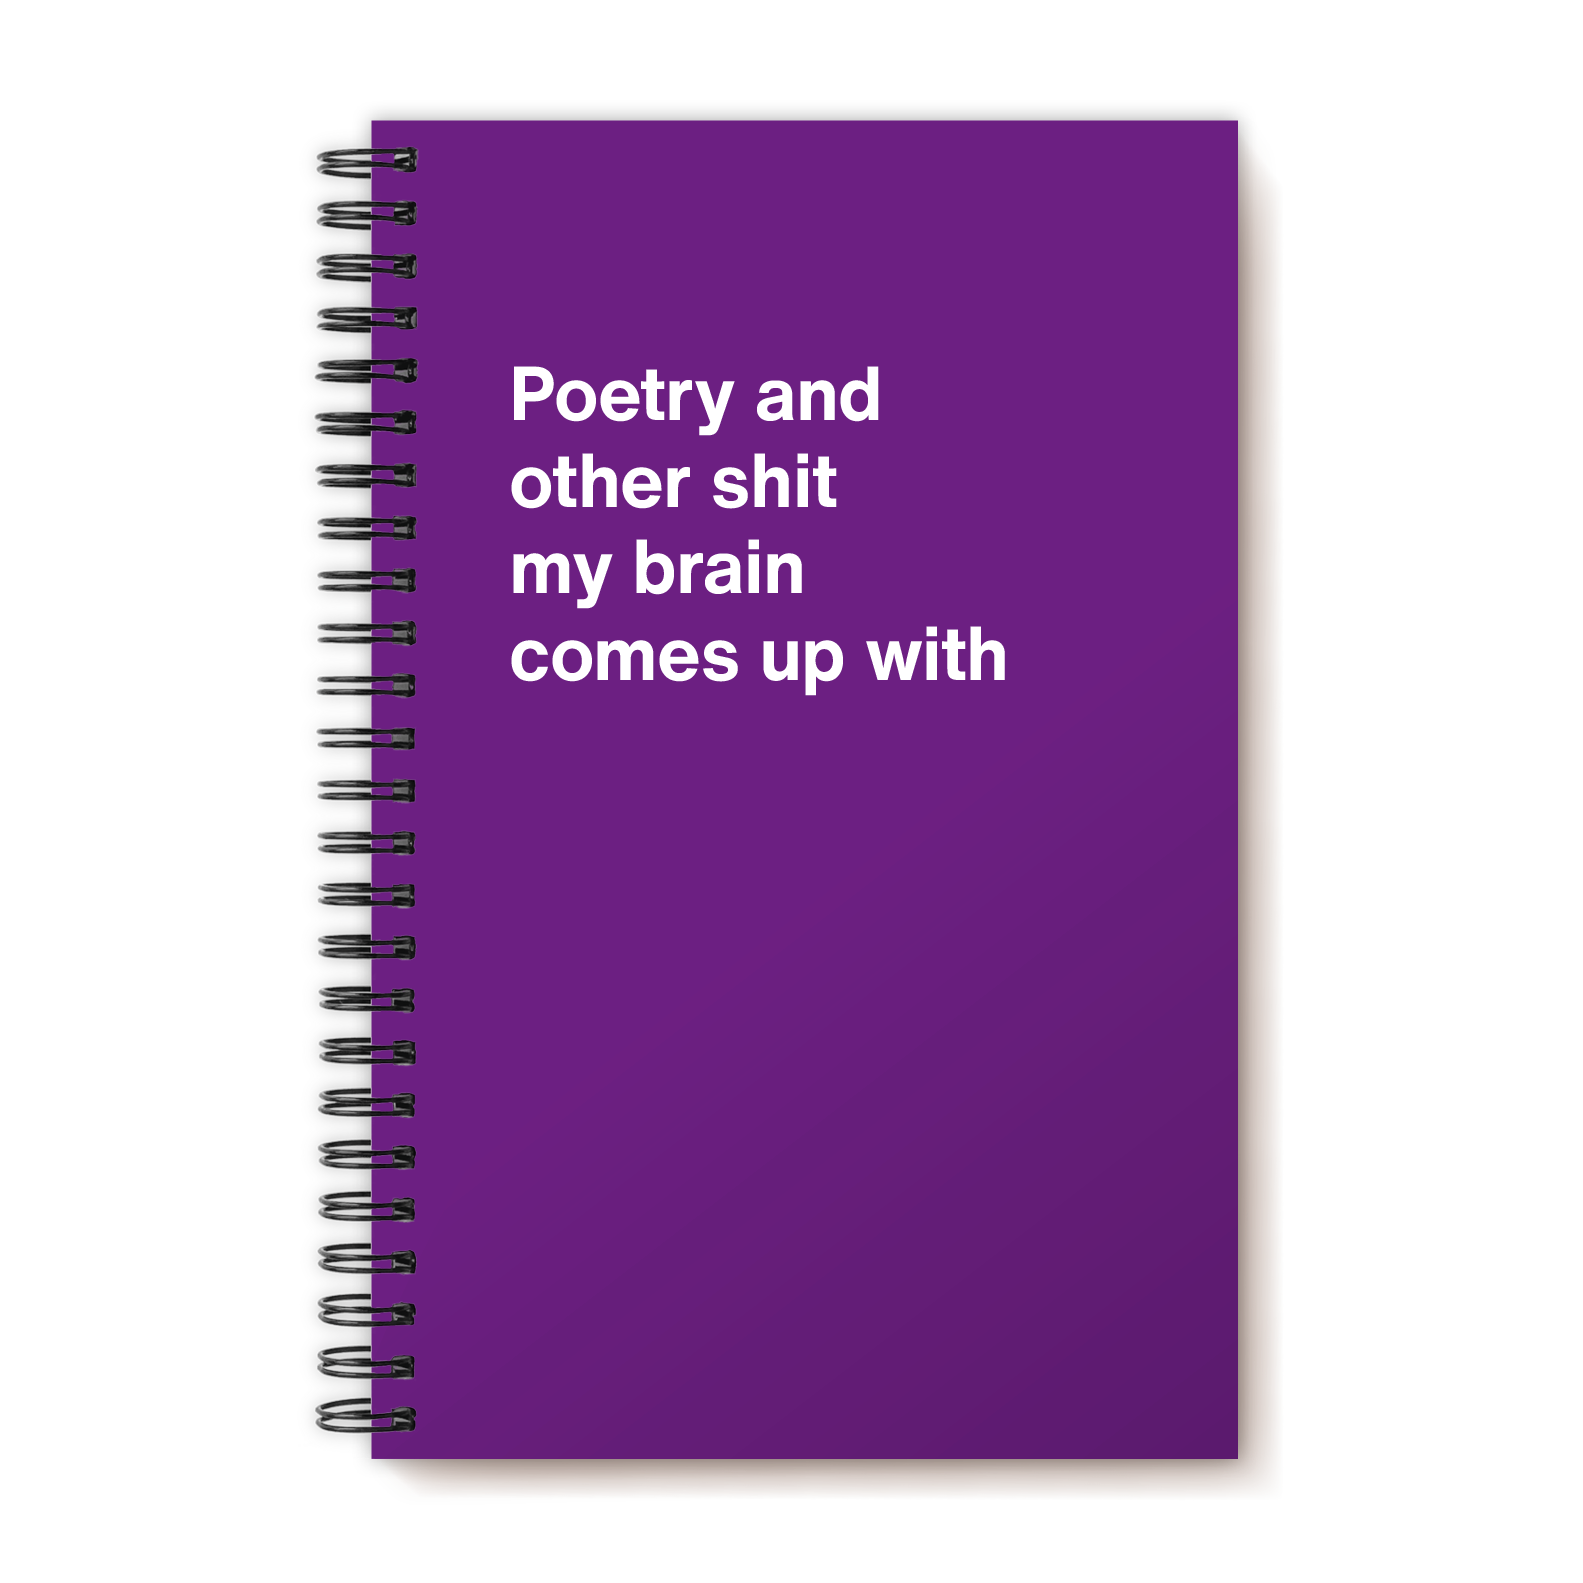 Poetry and other shit my brain comes up with | WTF Notebooks